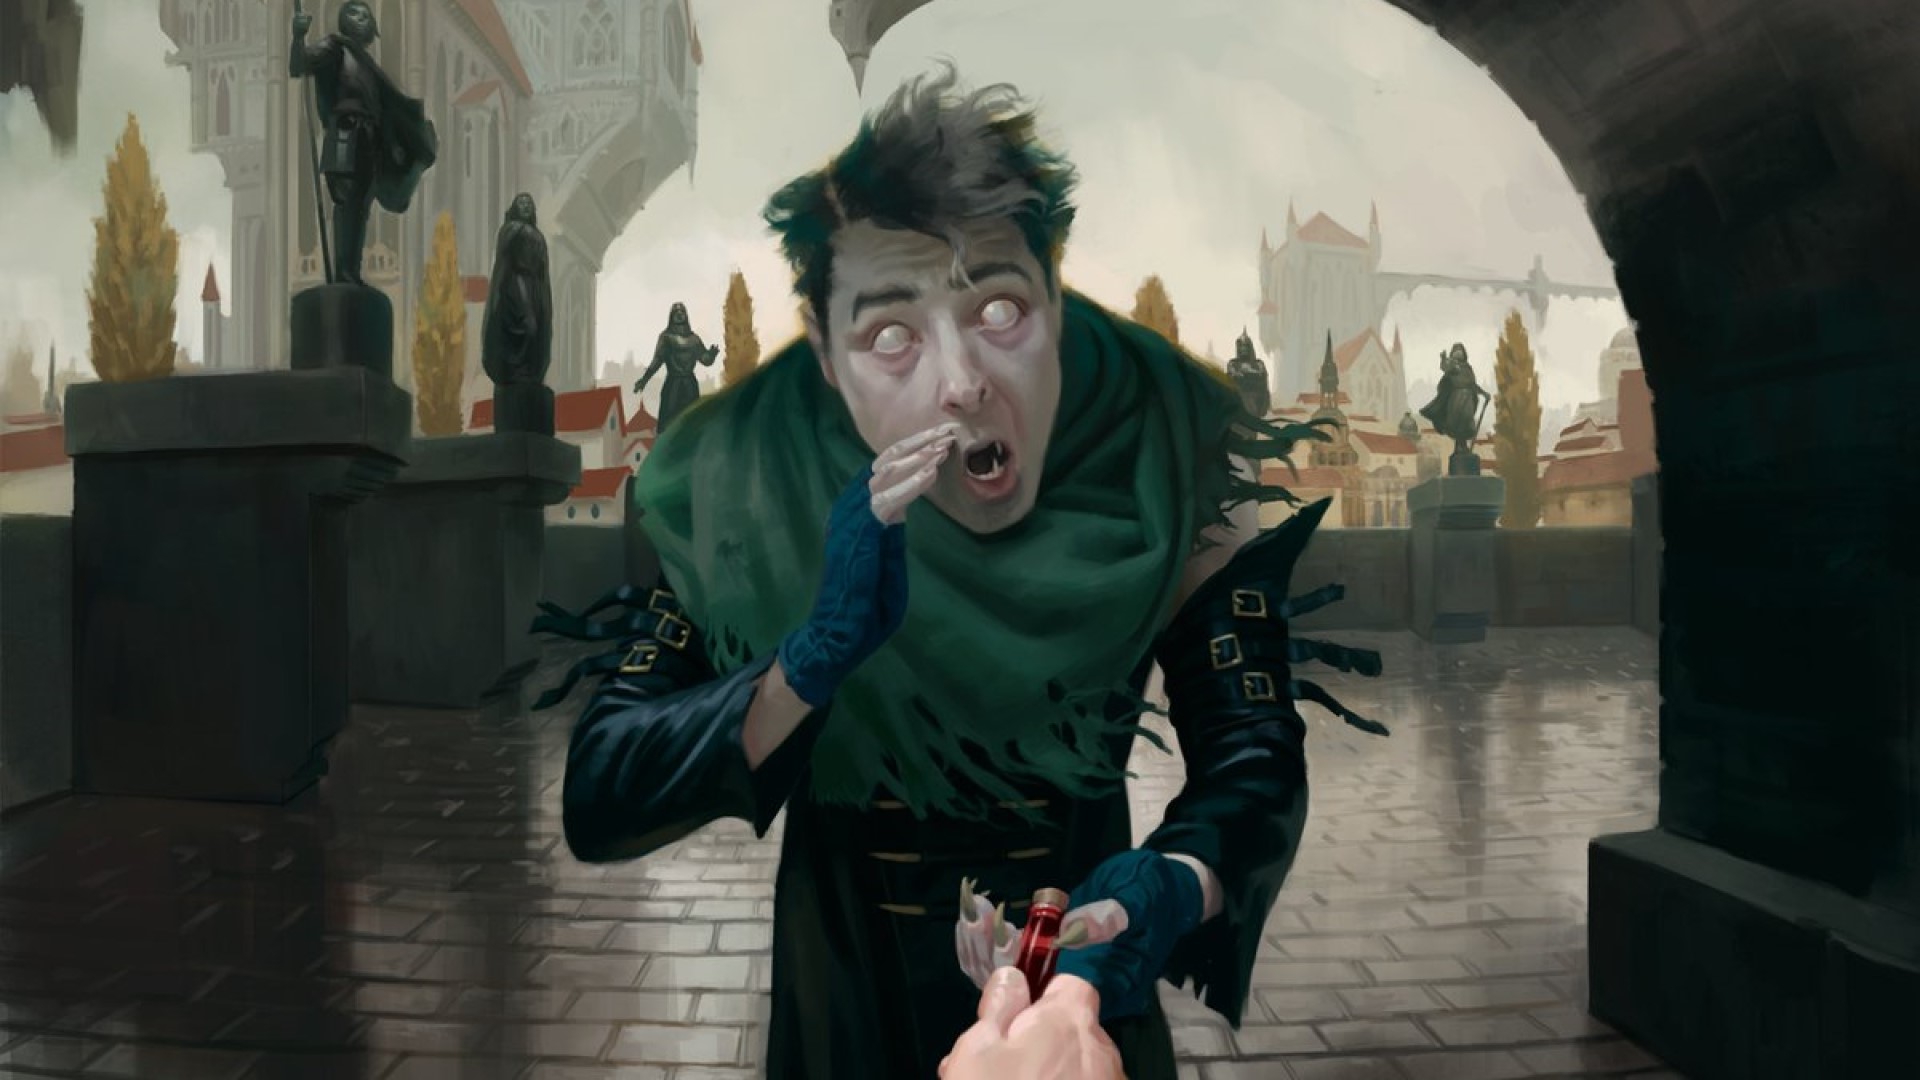 DnD message 5e - a person whispering with blank eyes- from the MTG card whispering snitch Illustrated by Jason Rainville